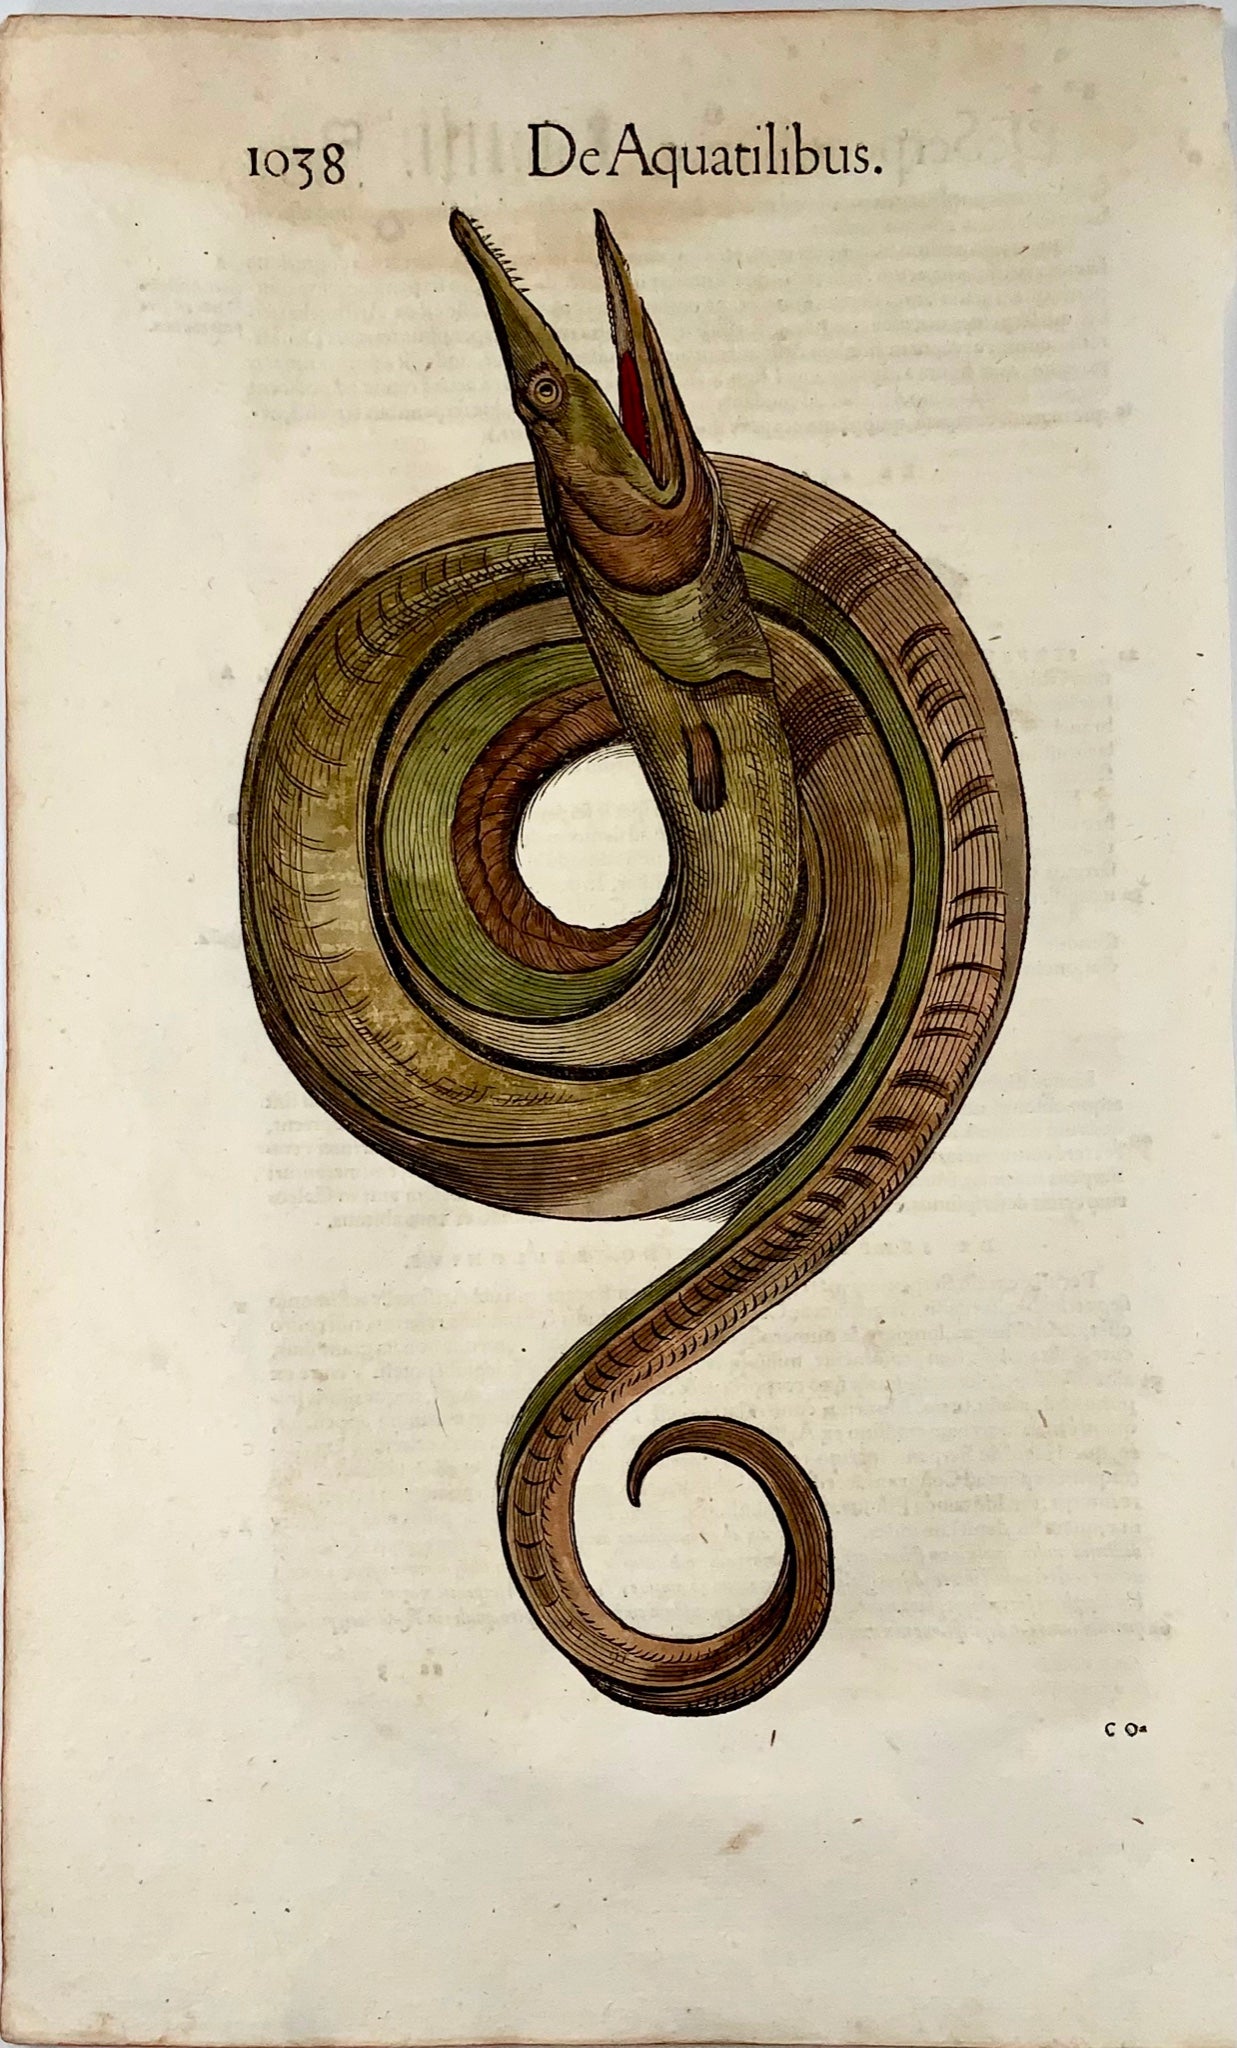 1558 Sea Serpent, Conrad Gesner, folio woodcut, hand coloured, First State